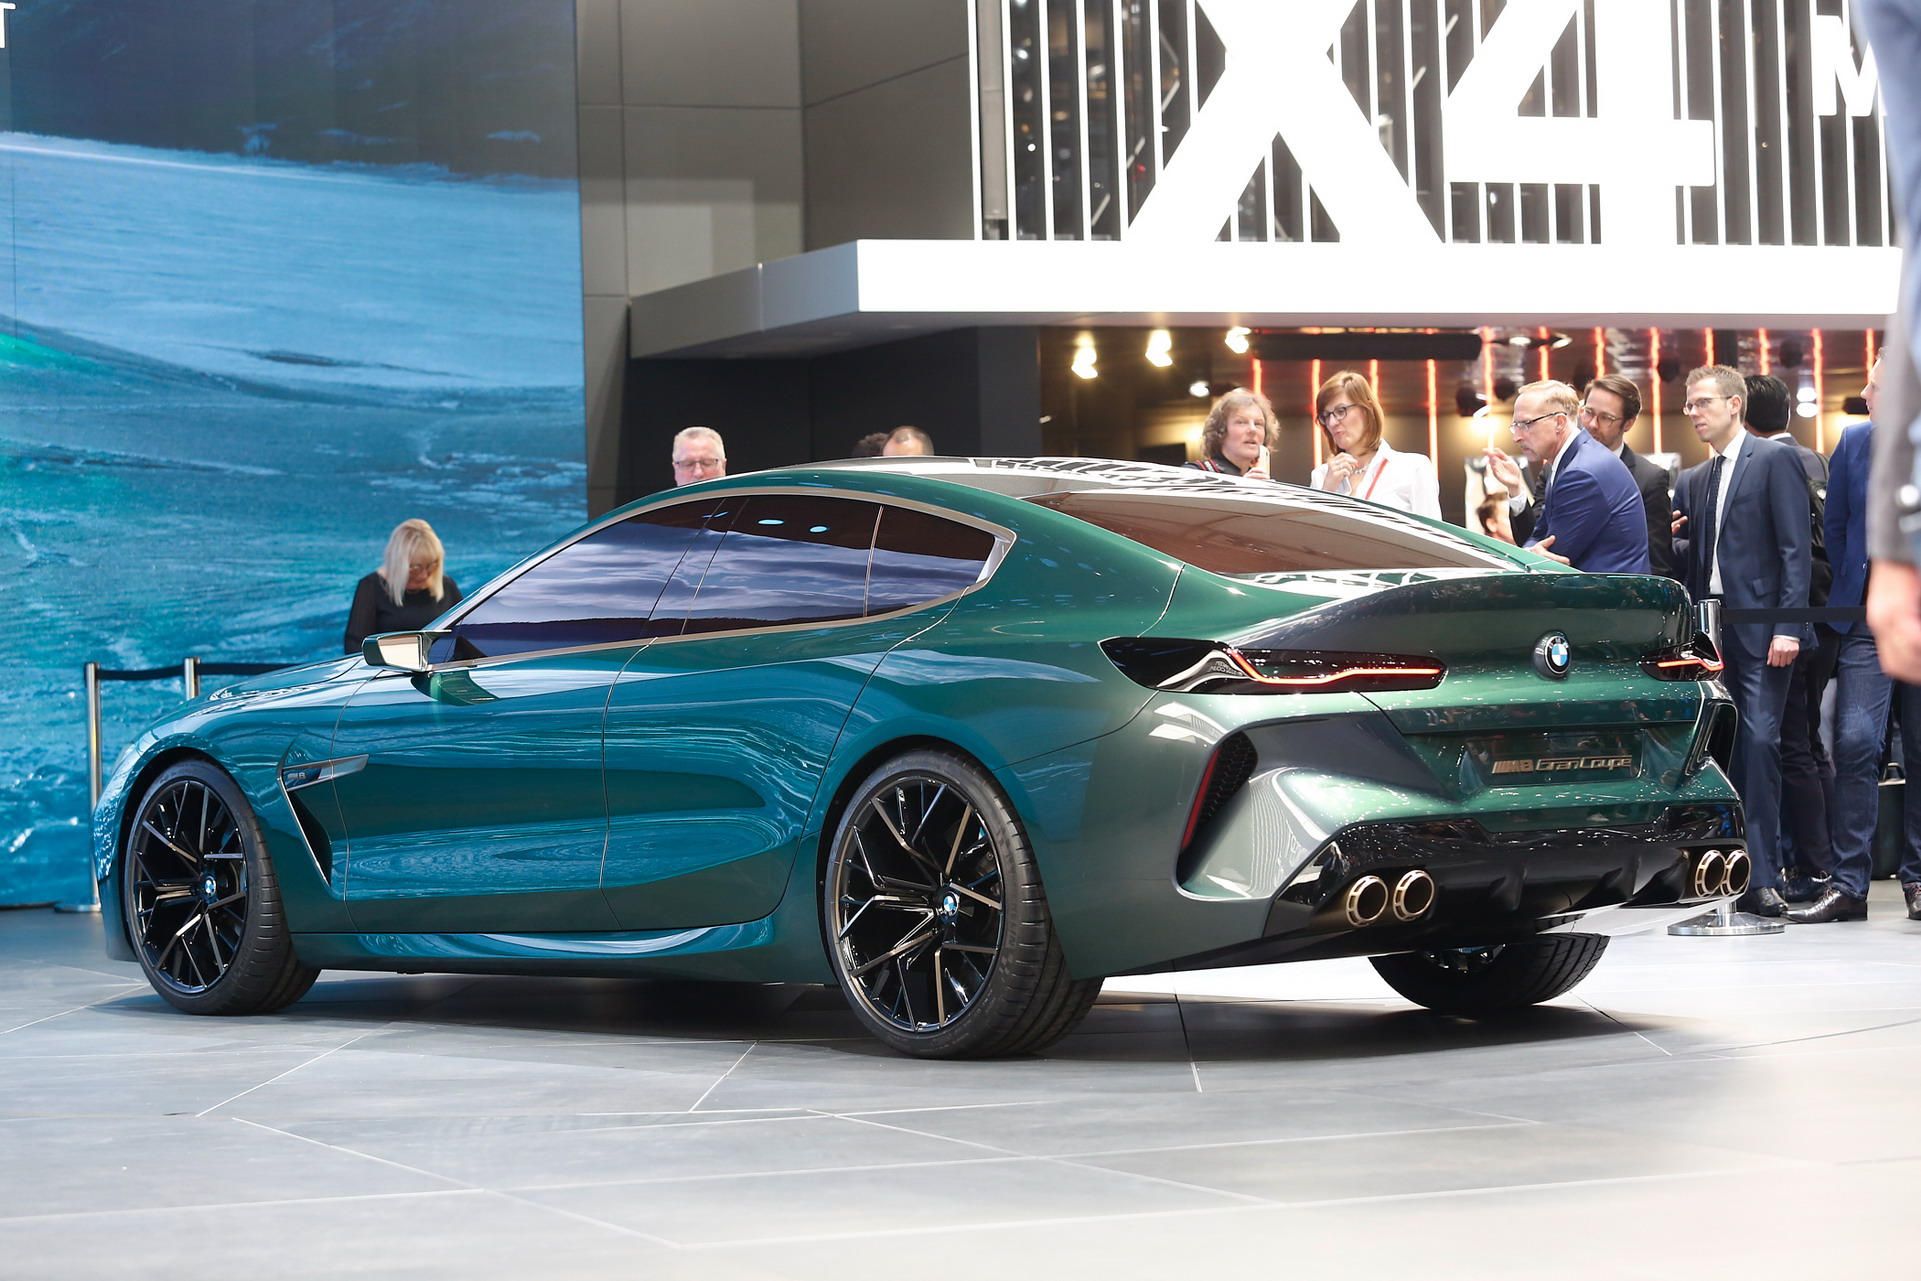 BMW Concept M8 Gran Coupe Goes After MercedesAMG GT 4 